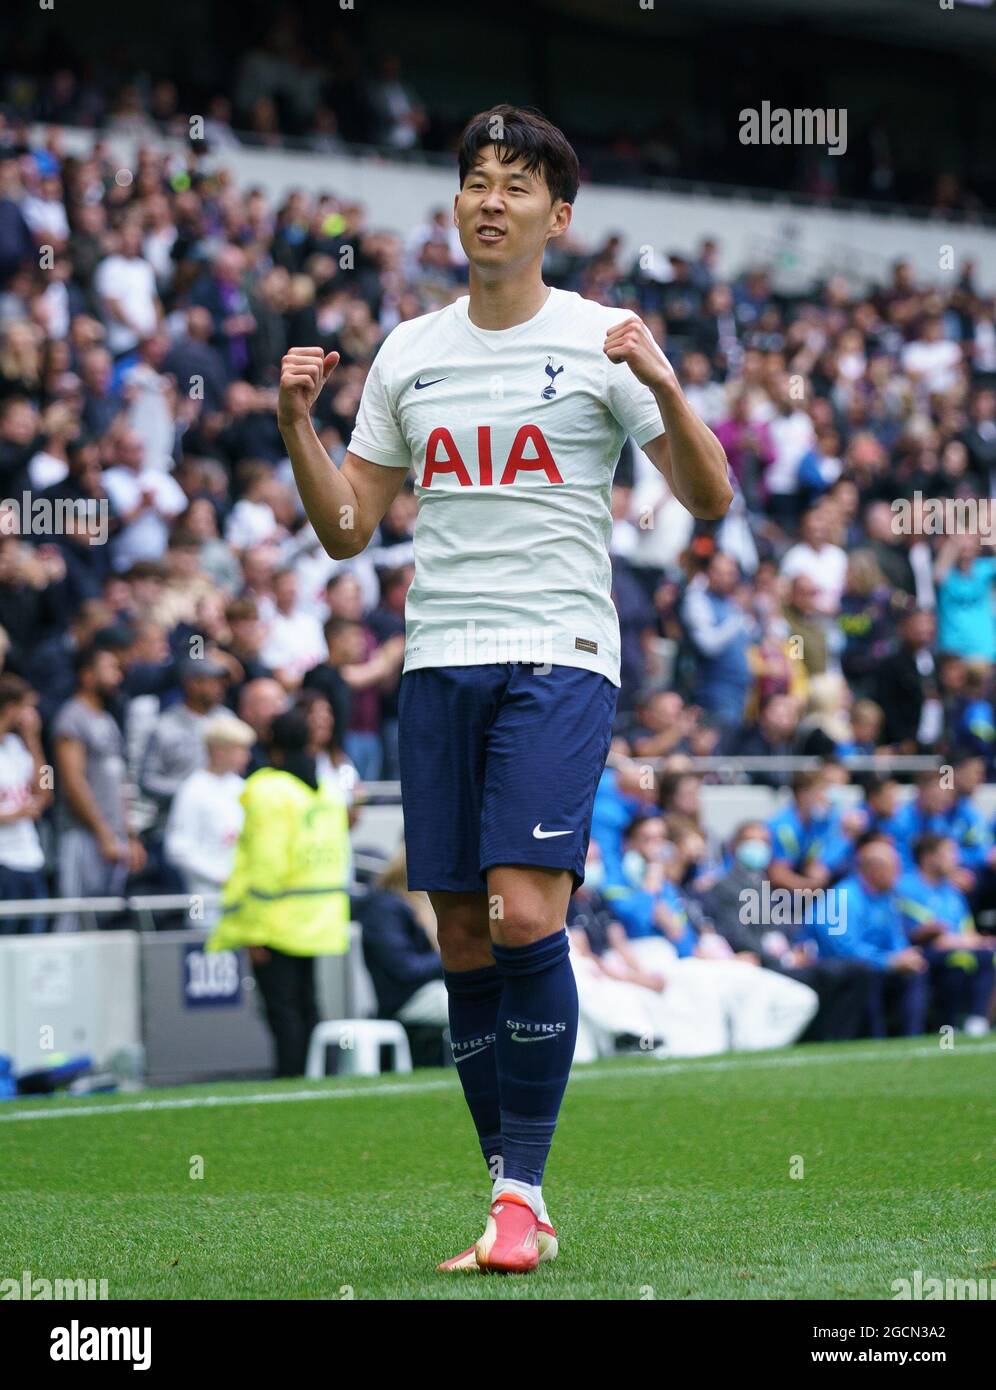 Heung Min Son is back at it! 💙 - Tottenham Hotspur